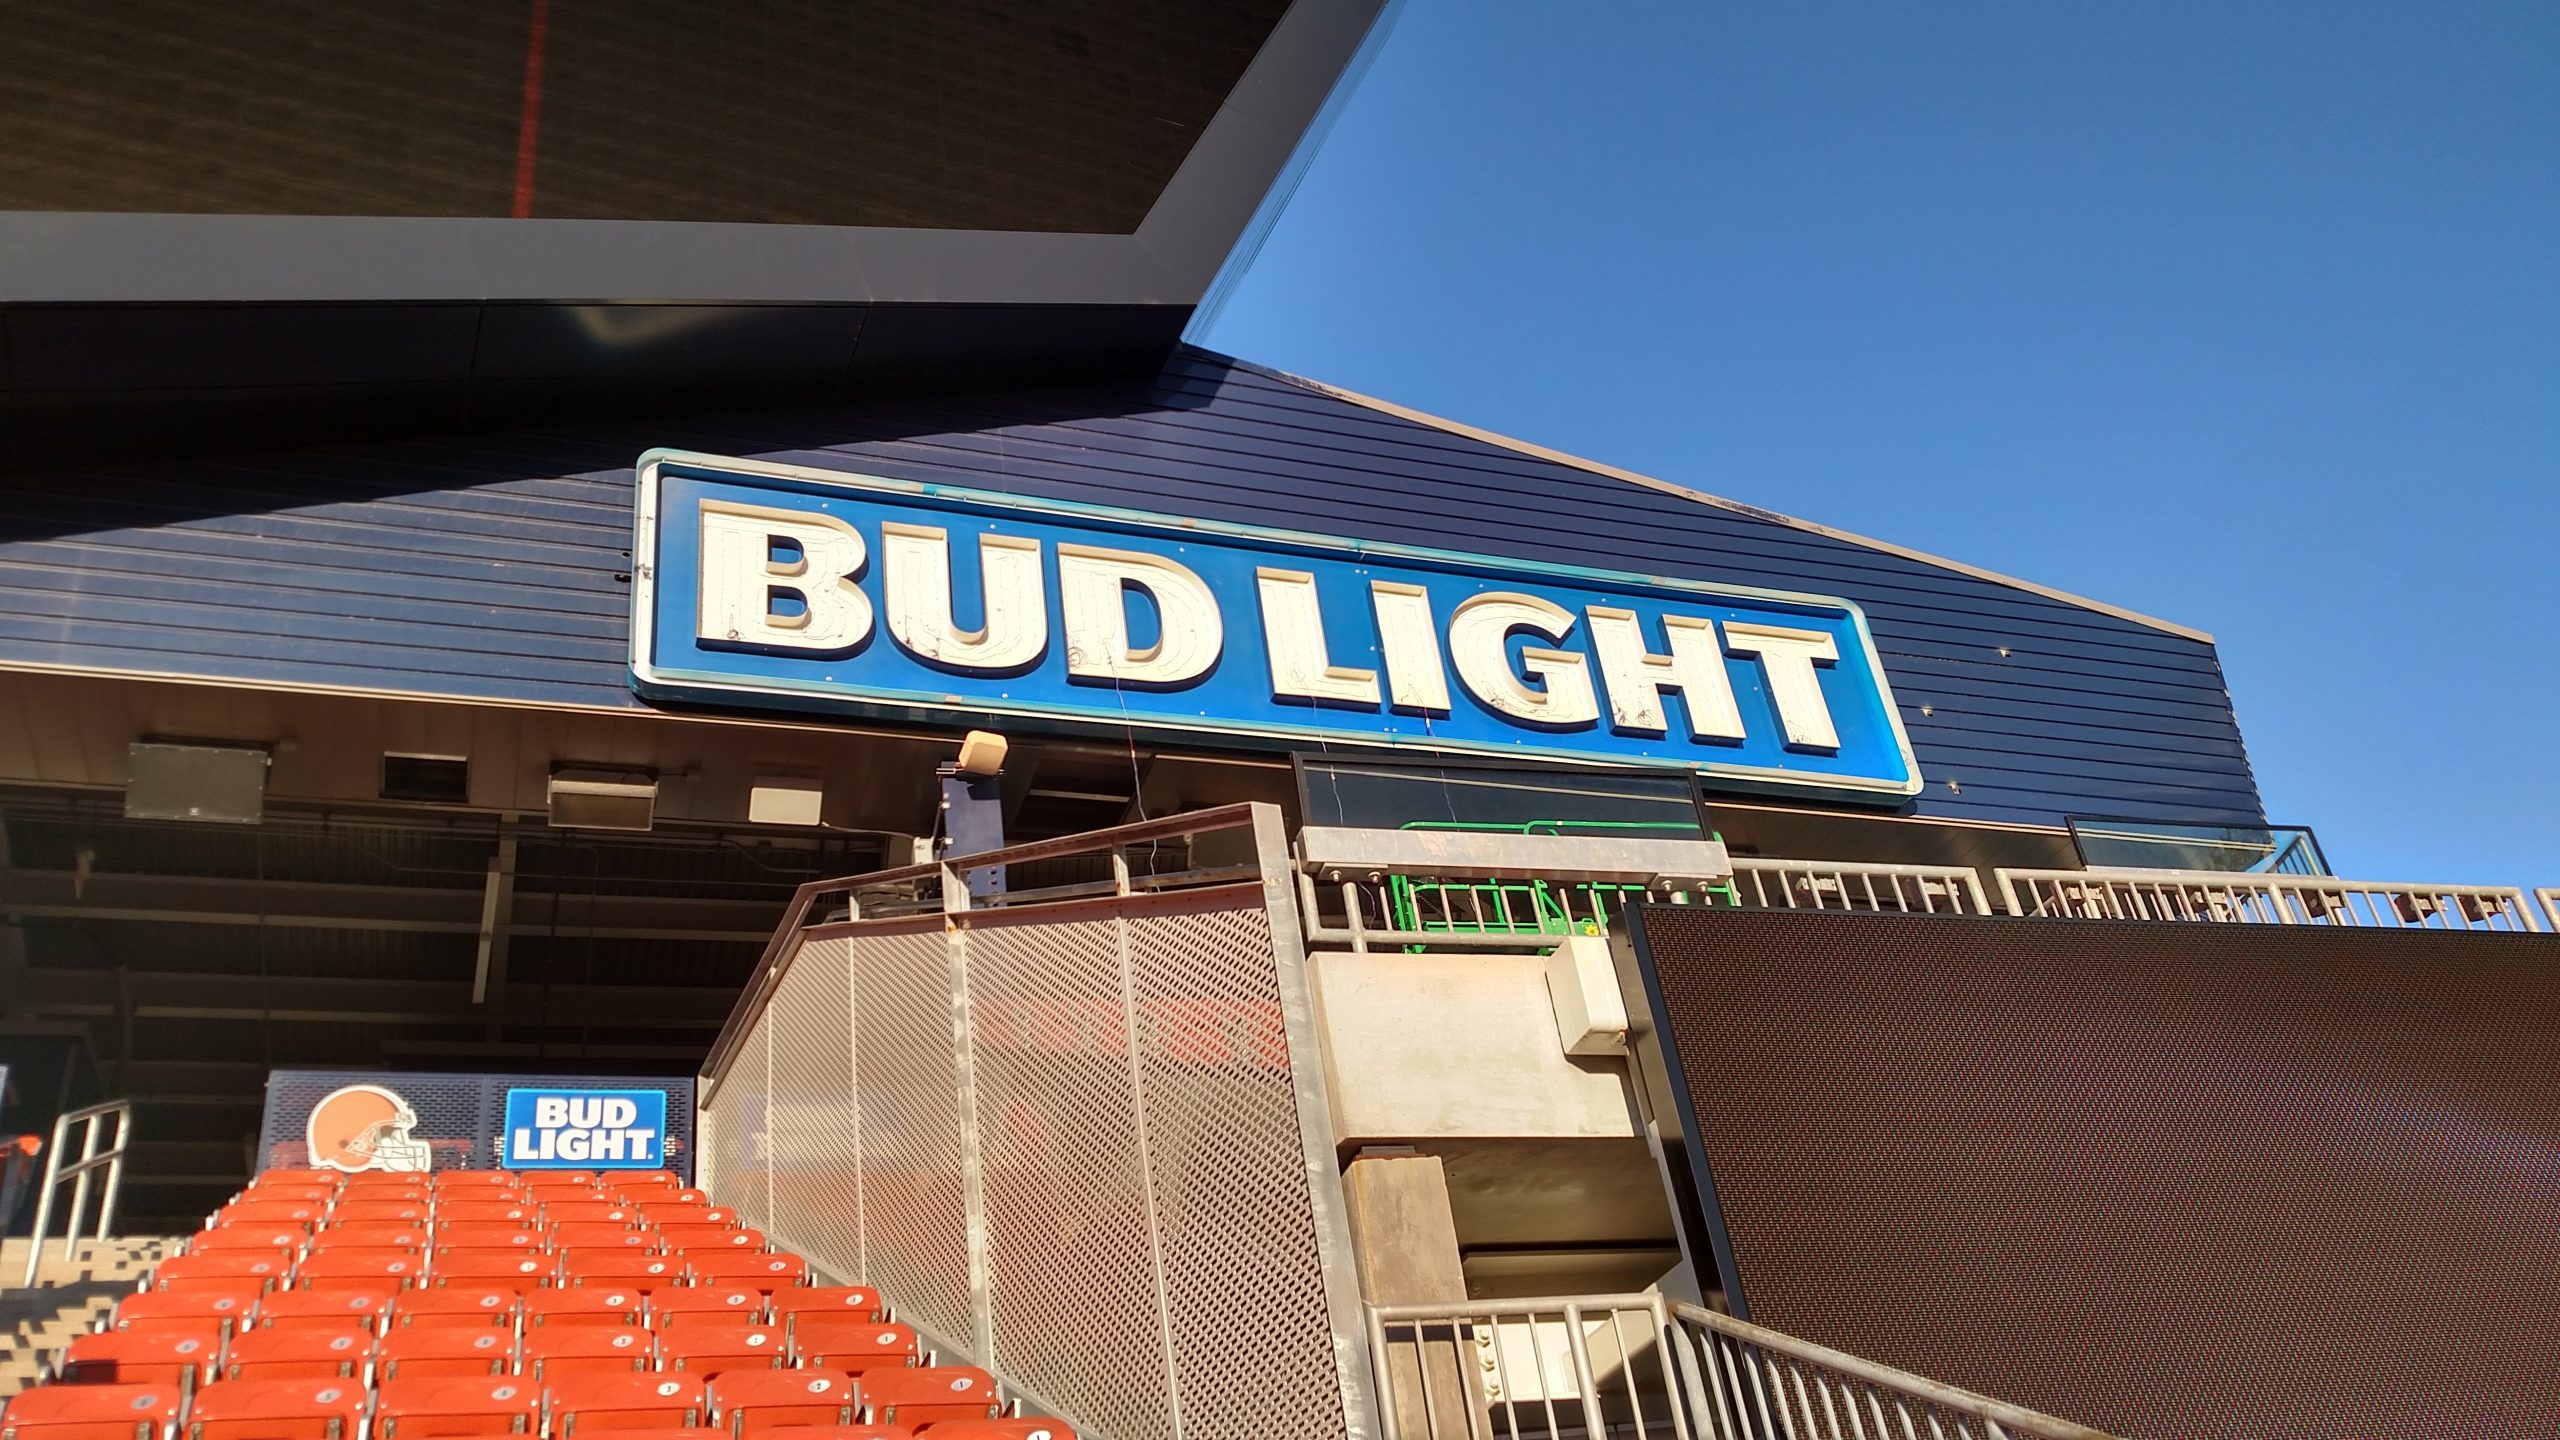 bud-light-wall-signs-cleveland-browns-image-4